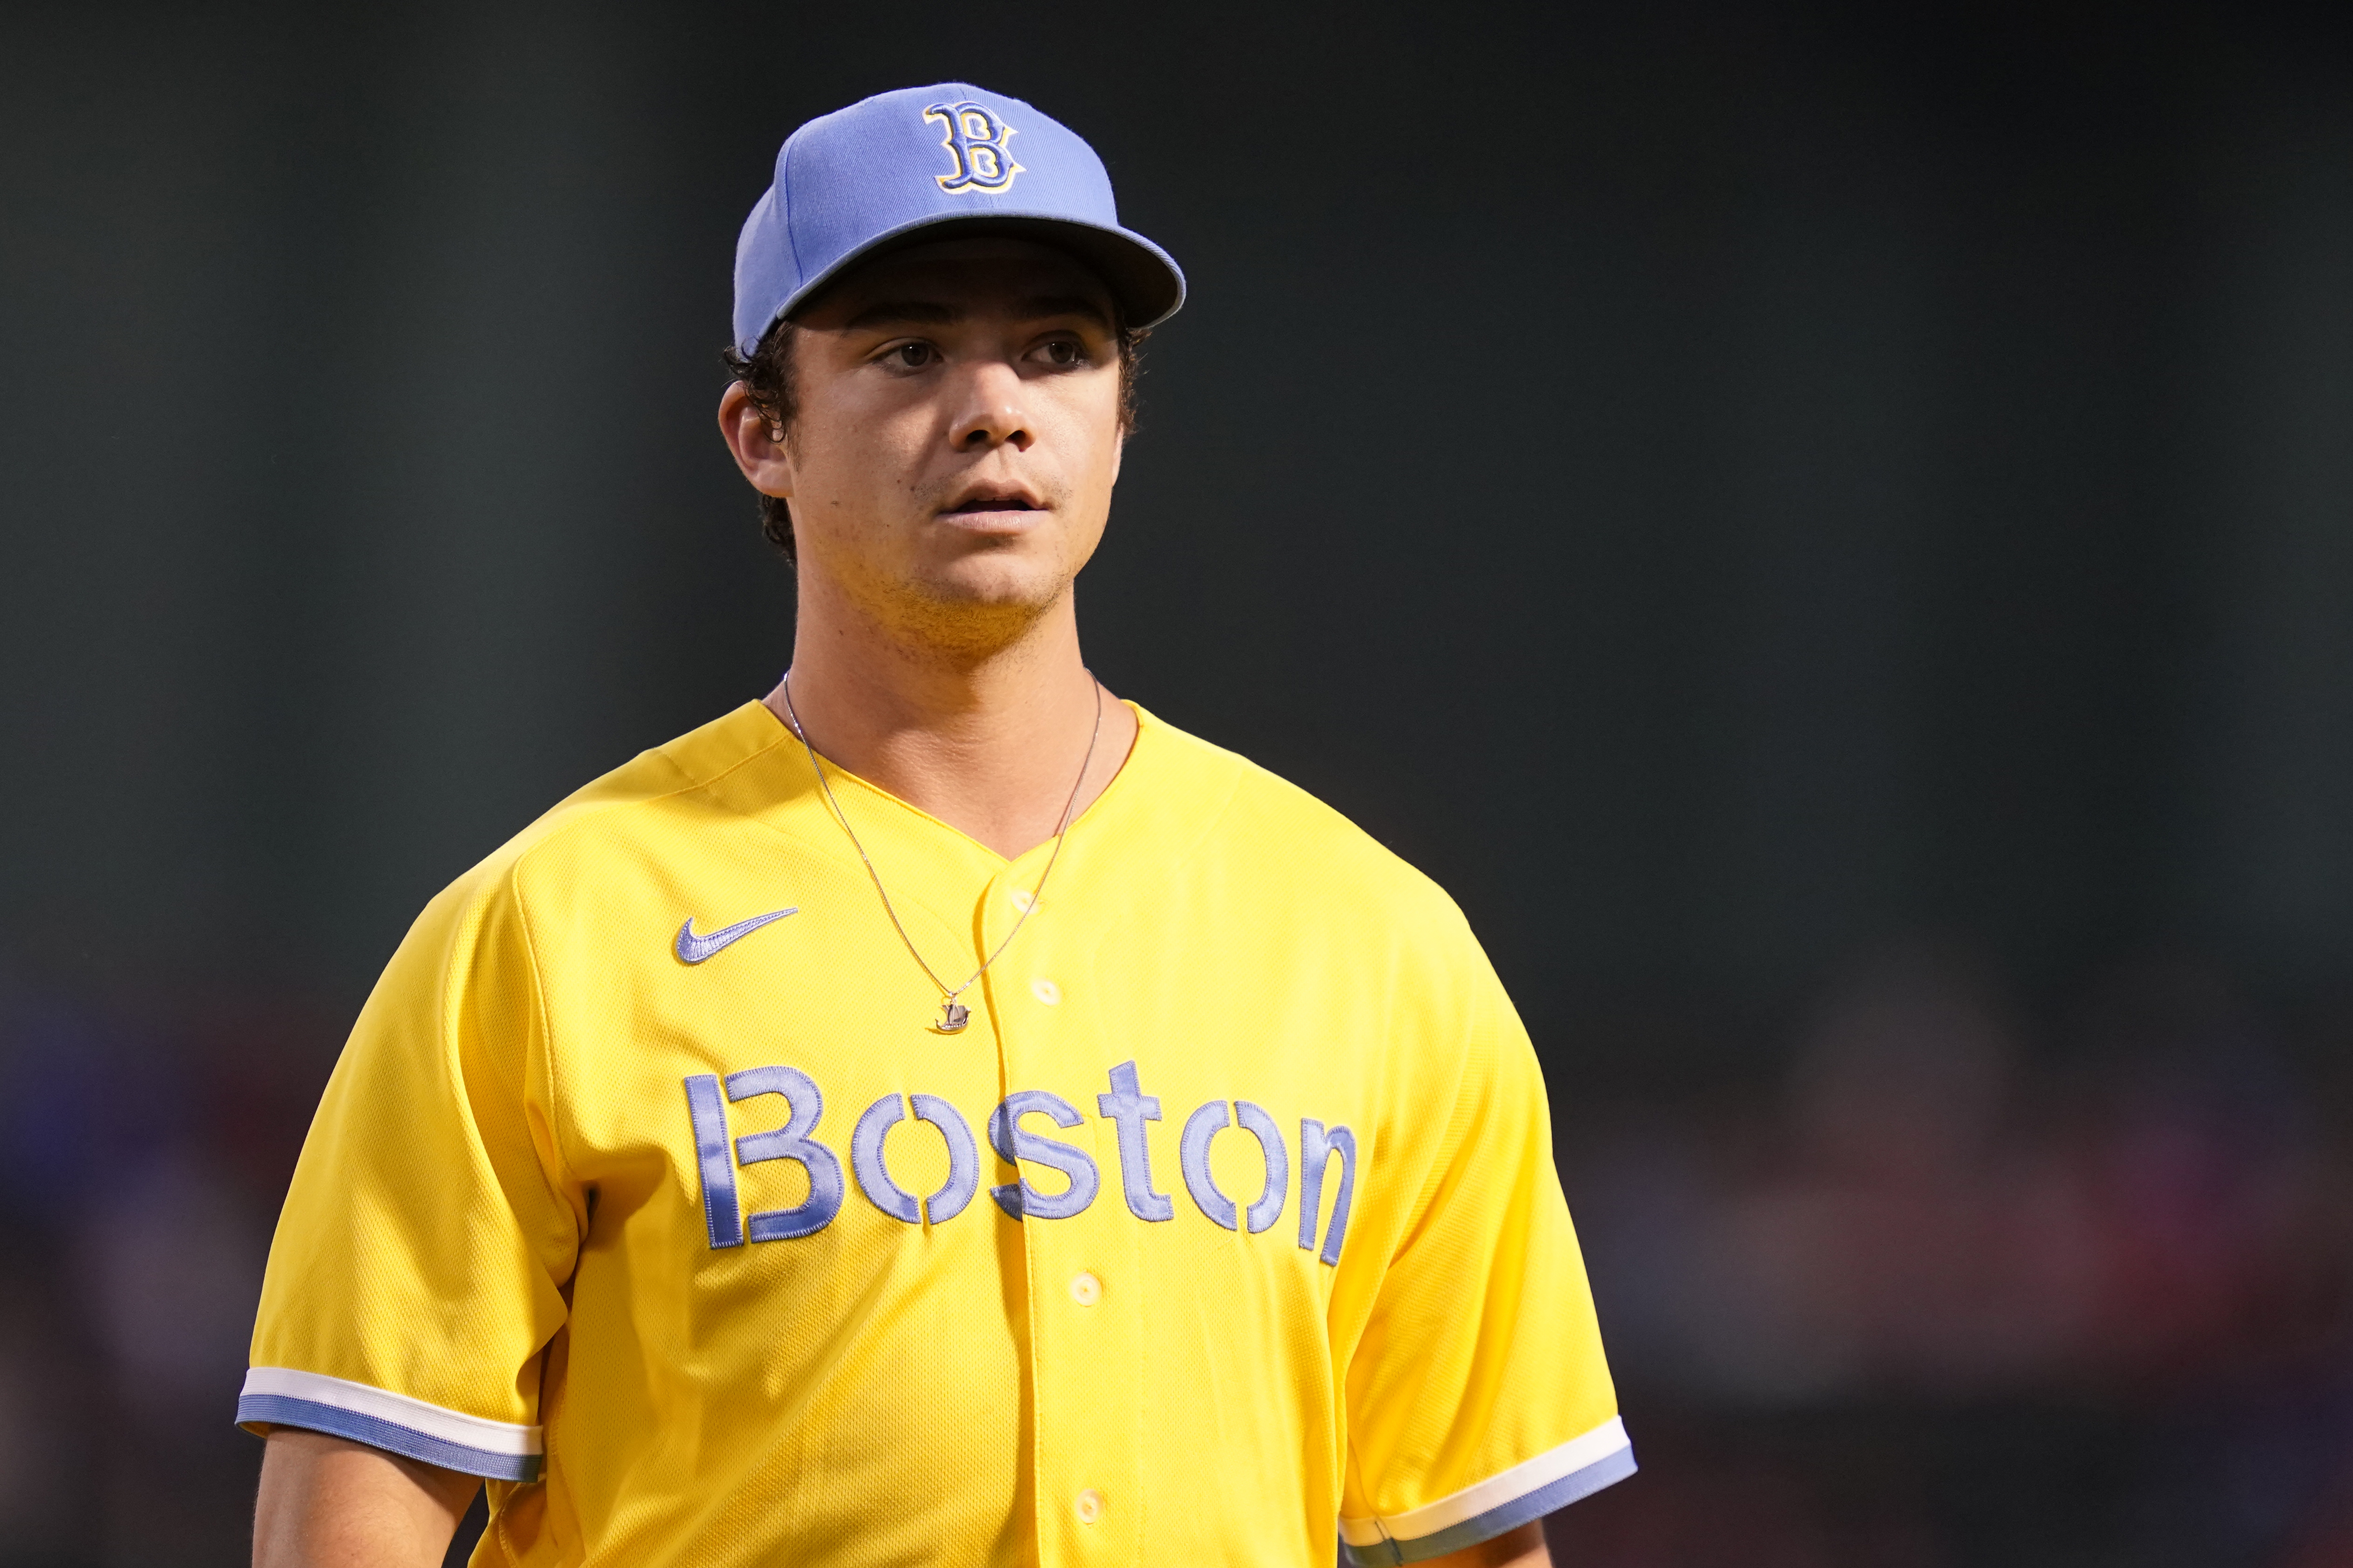 The Red Sox will be wearing yellow and blue uniforms on Patriots